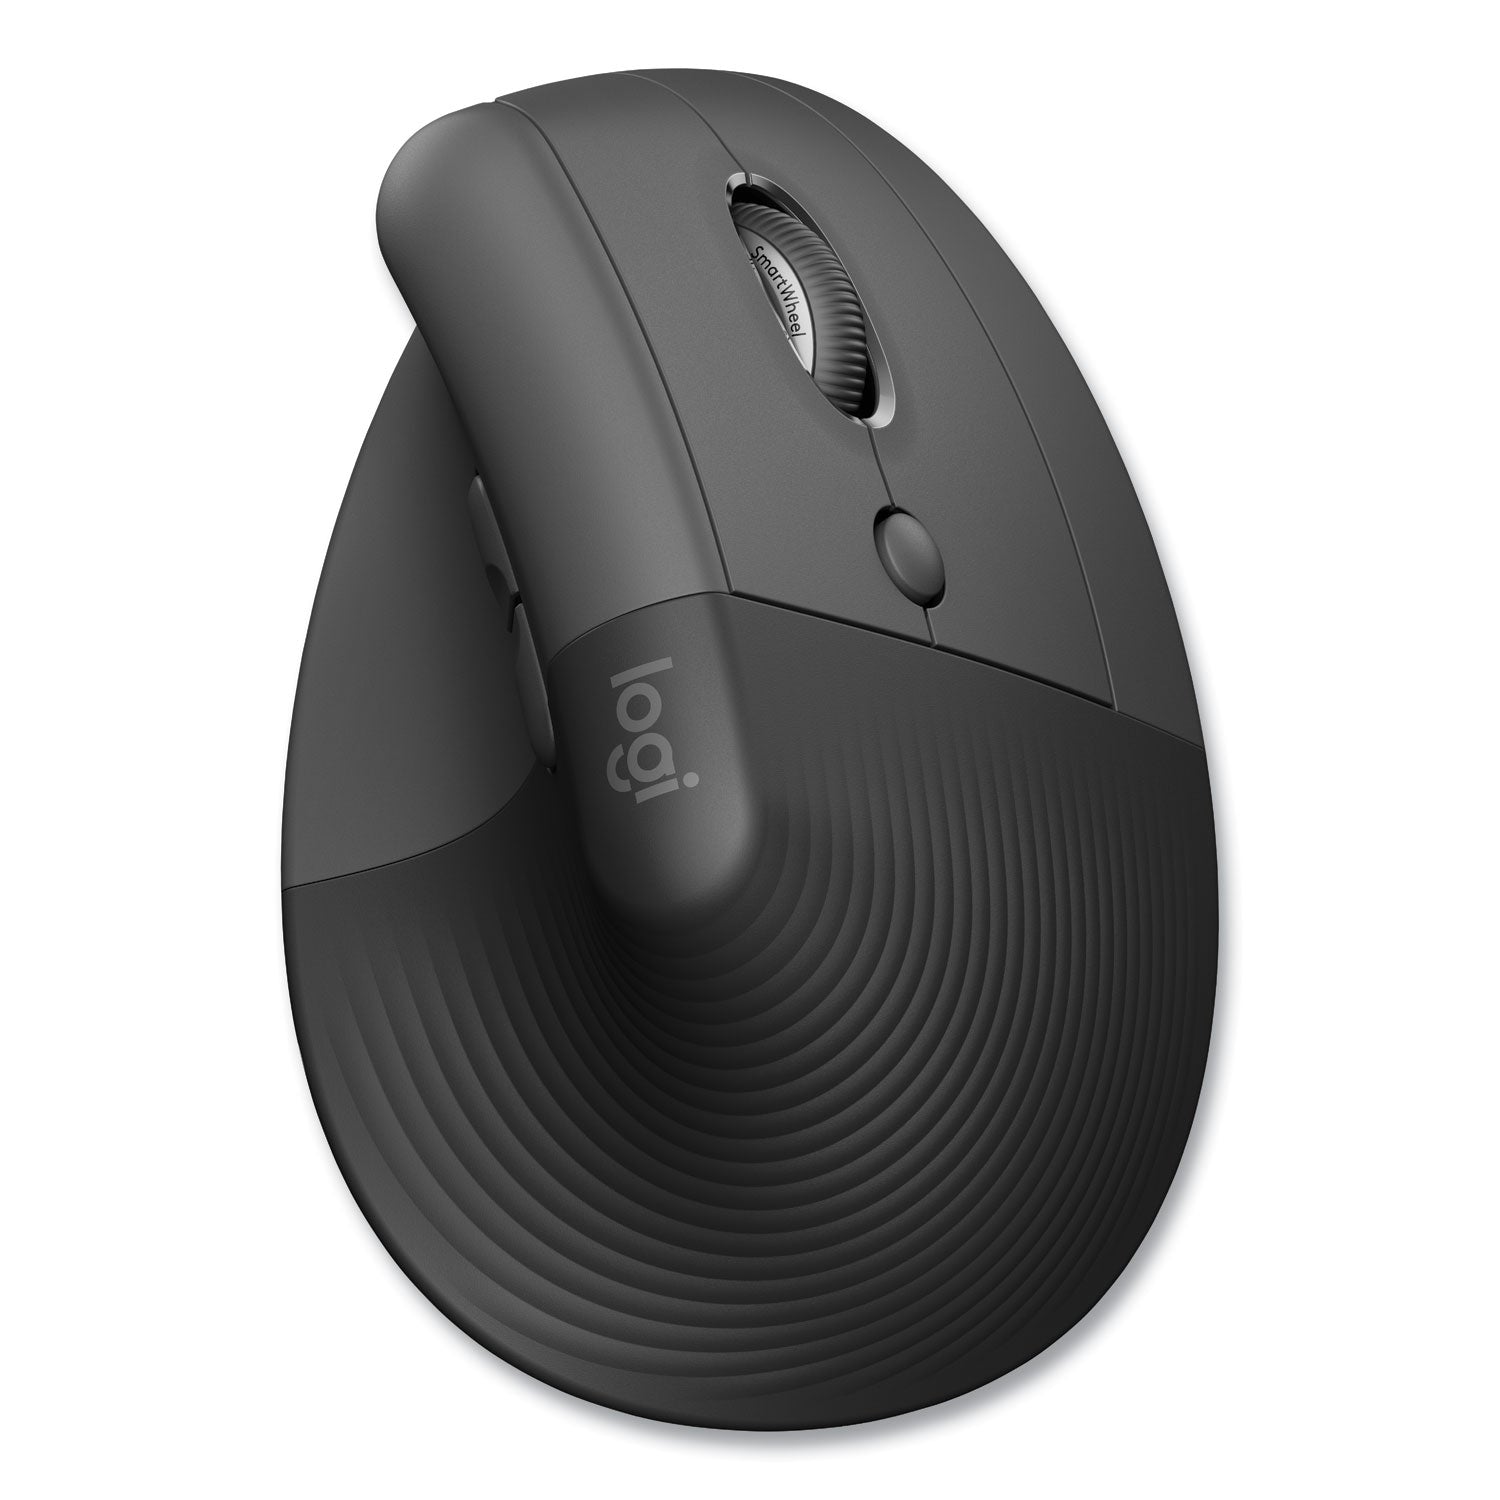 lift-for-business-vertical-ergonomic-mouse-24-ghz-frequency-32-ft-wireless-range-right-hand-use-graphite_log910006491 - 1